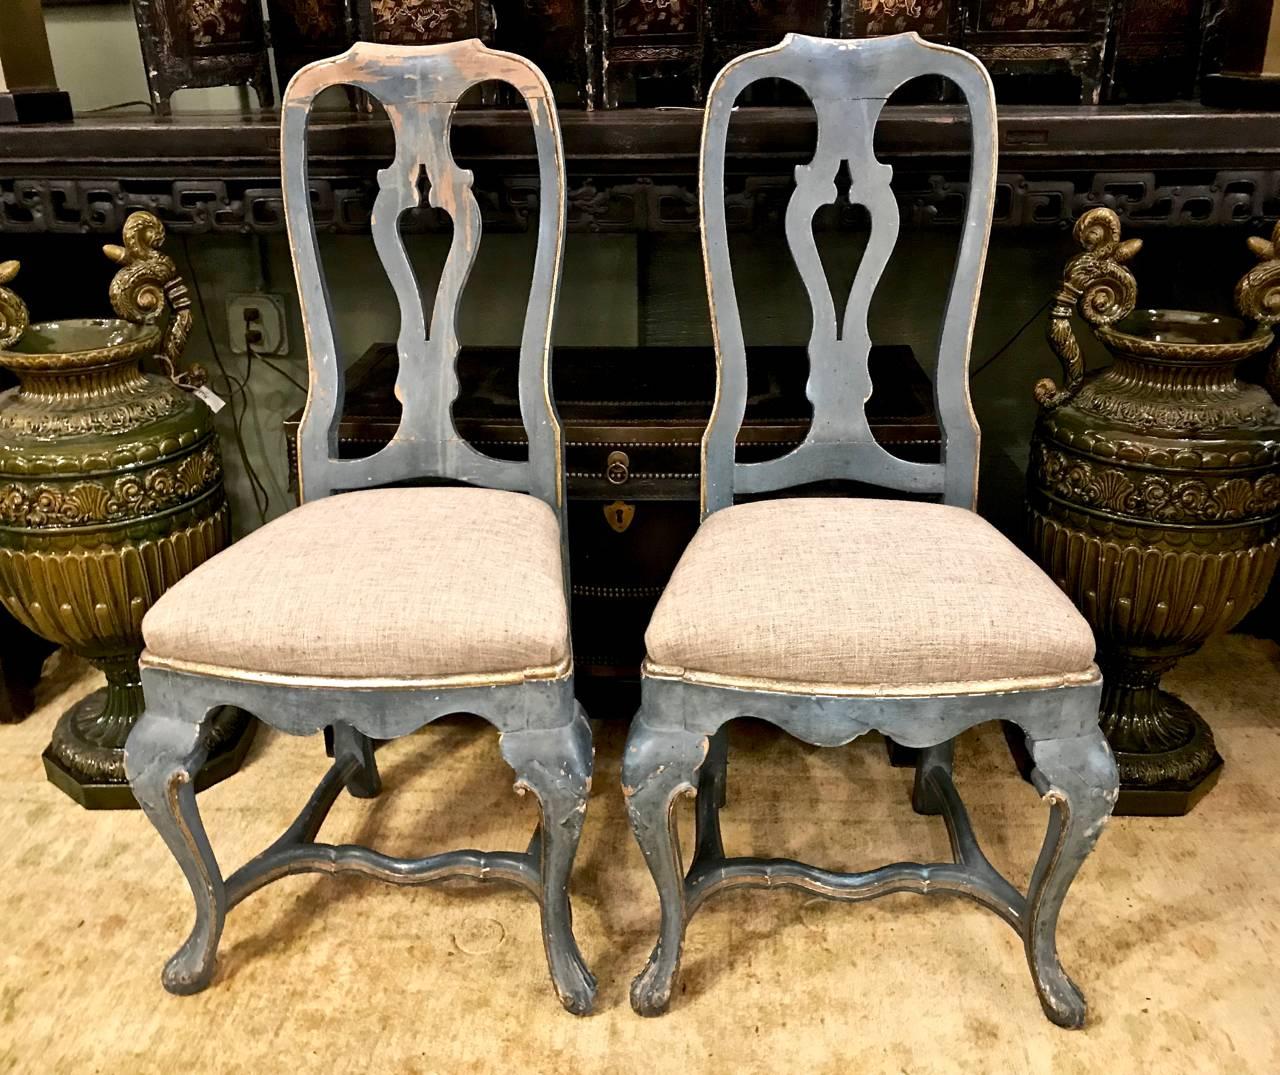 This a superb pair of circa 1760-1770 Swedish Rococo side chairs that preserve their original moody blue-gray paint. The chairs are classic and unsophisticated in form. Both chairs retain their horse hair upholstery structure and are on their way to